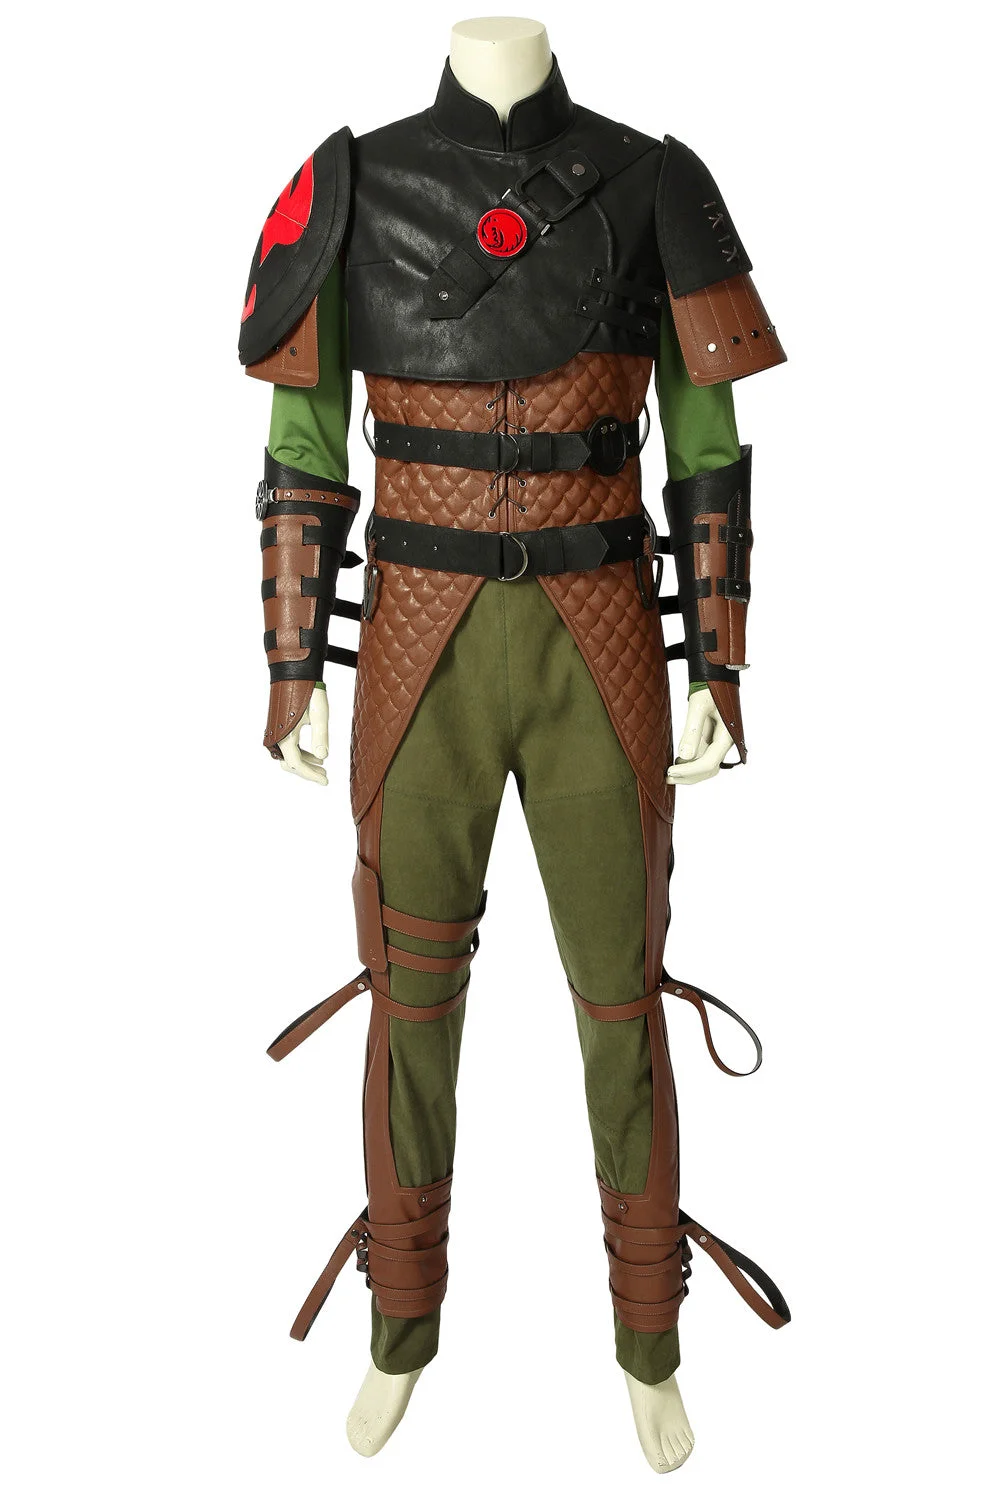 How To Train Your Dragon 2 Hiccup Outfits Cosplay Costume